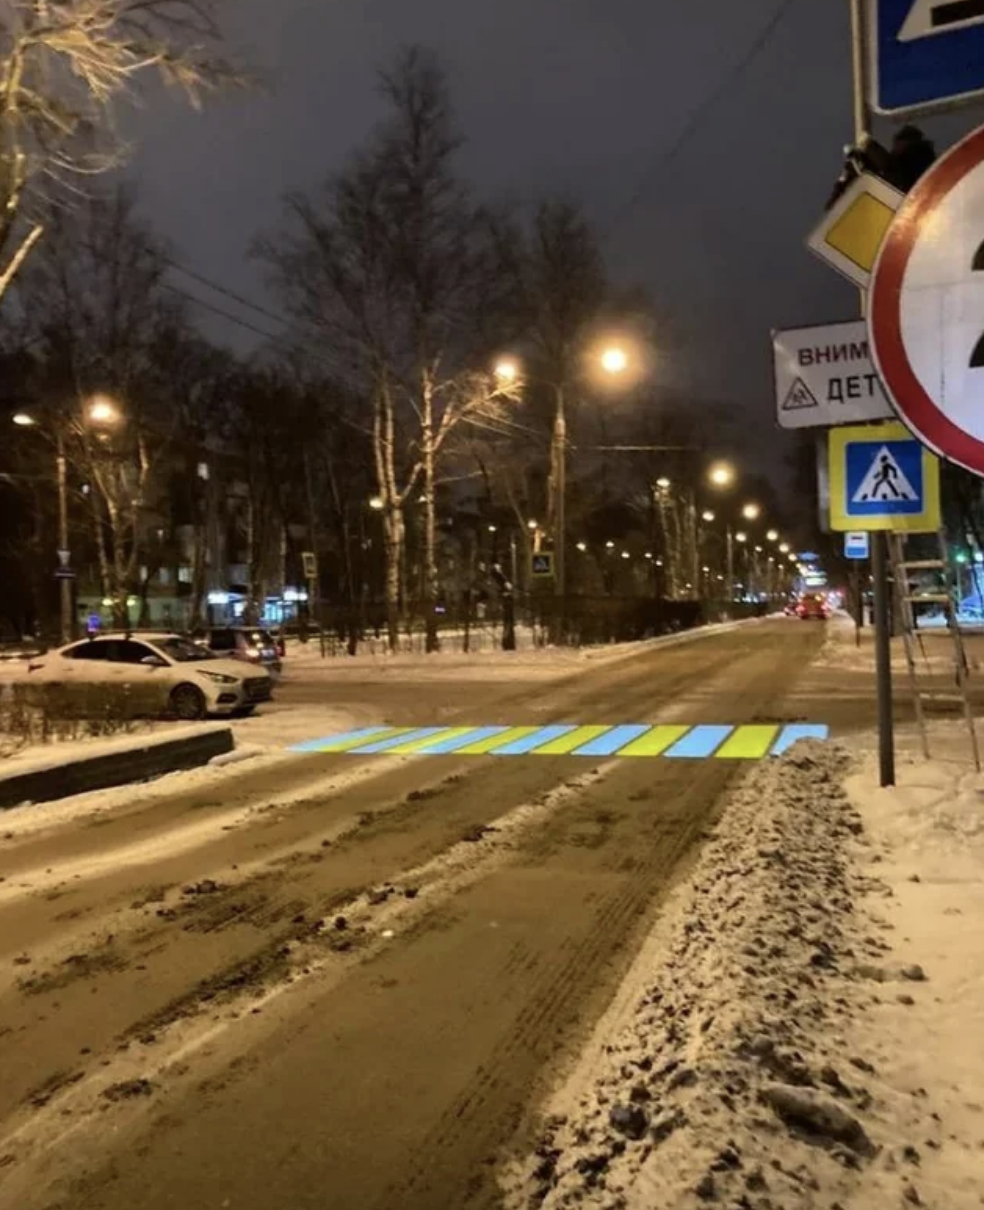 A snowy street at night with a pedestrian crossing and warning signs